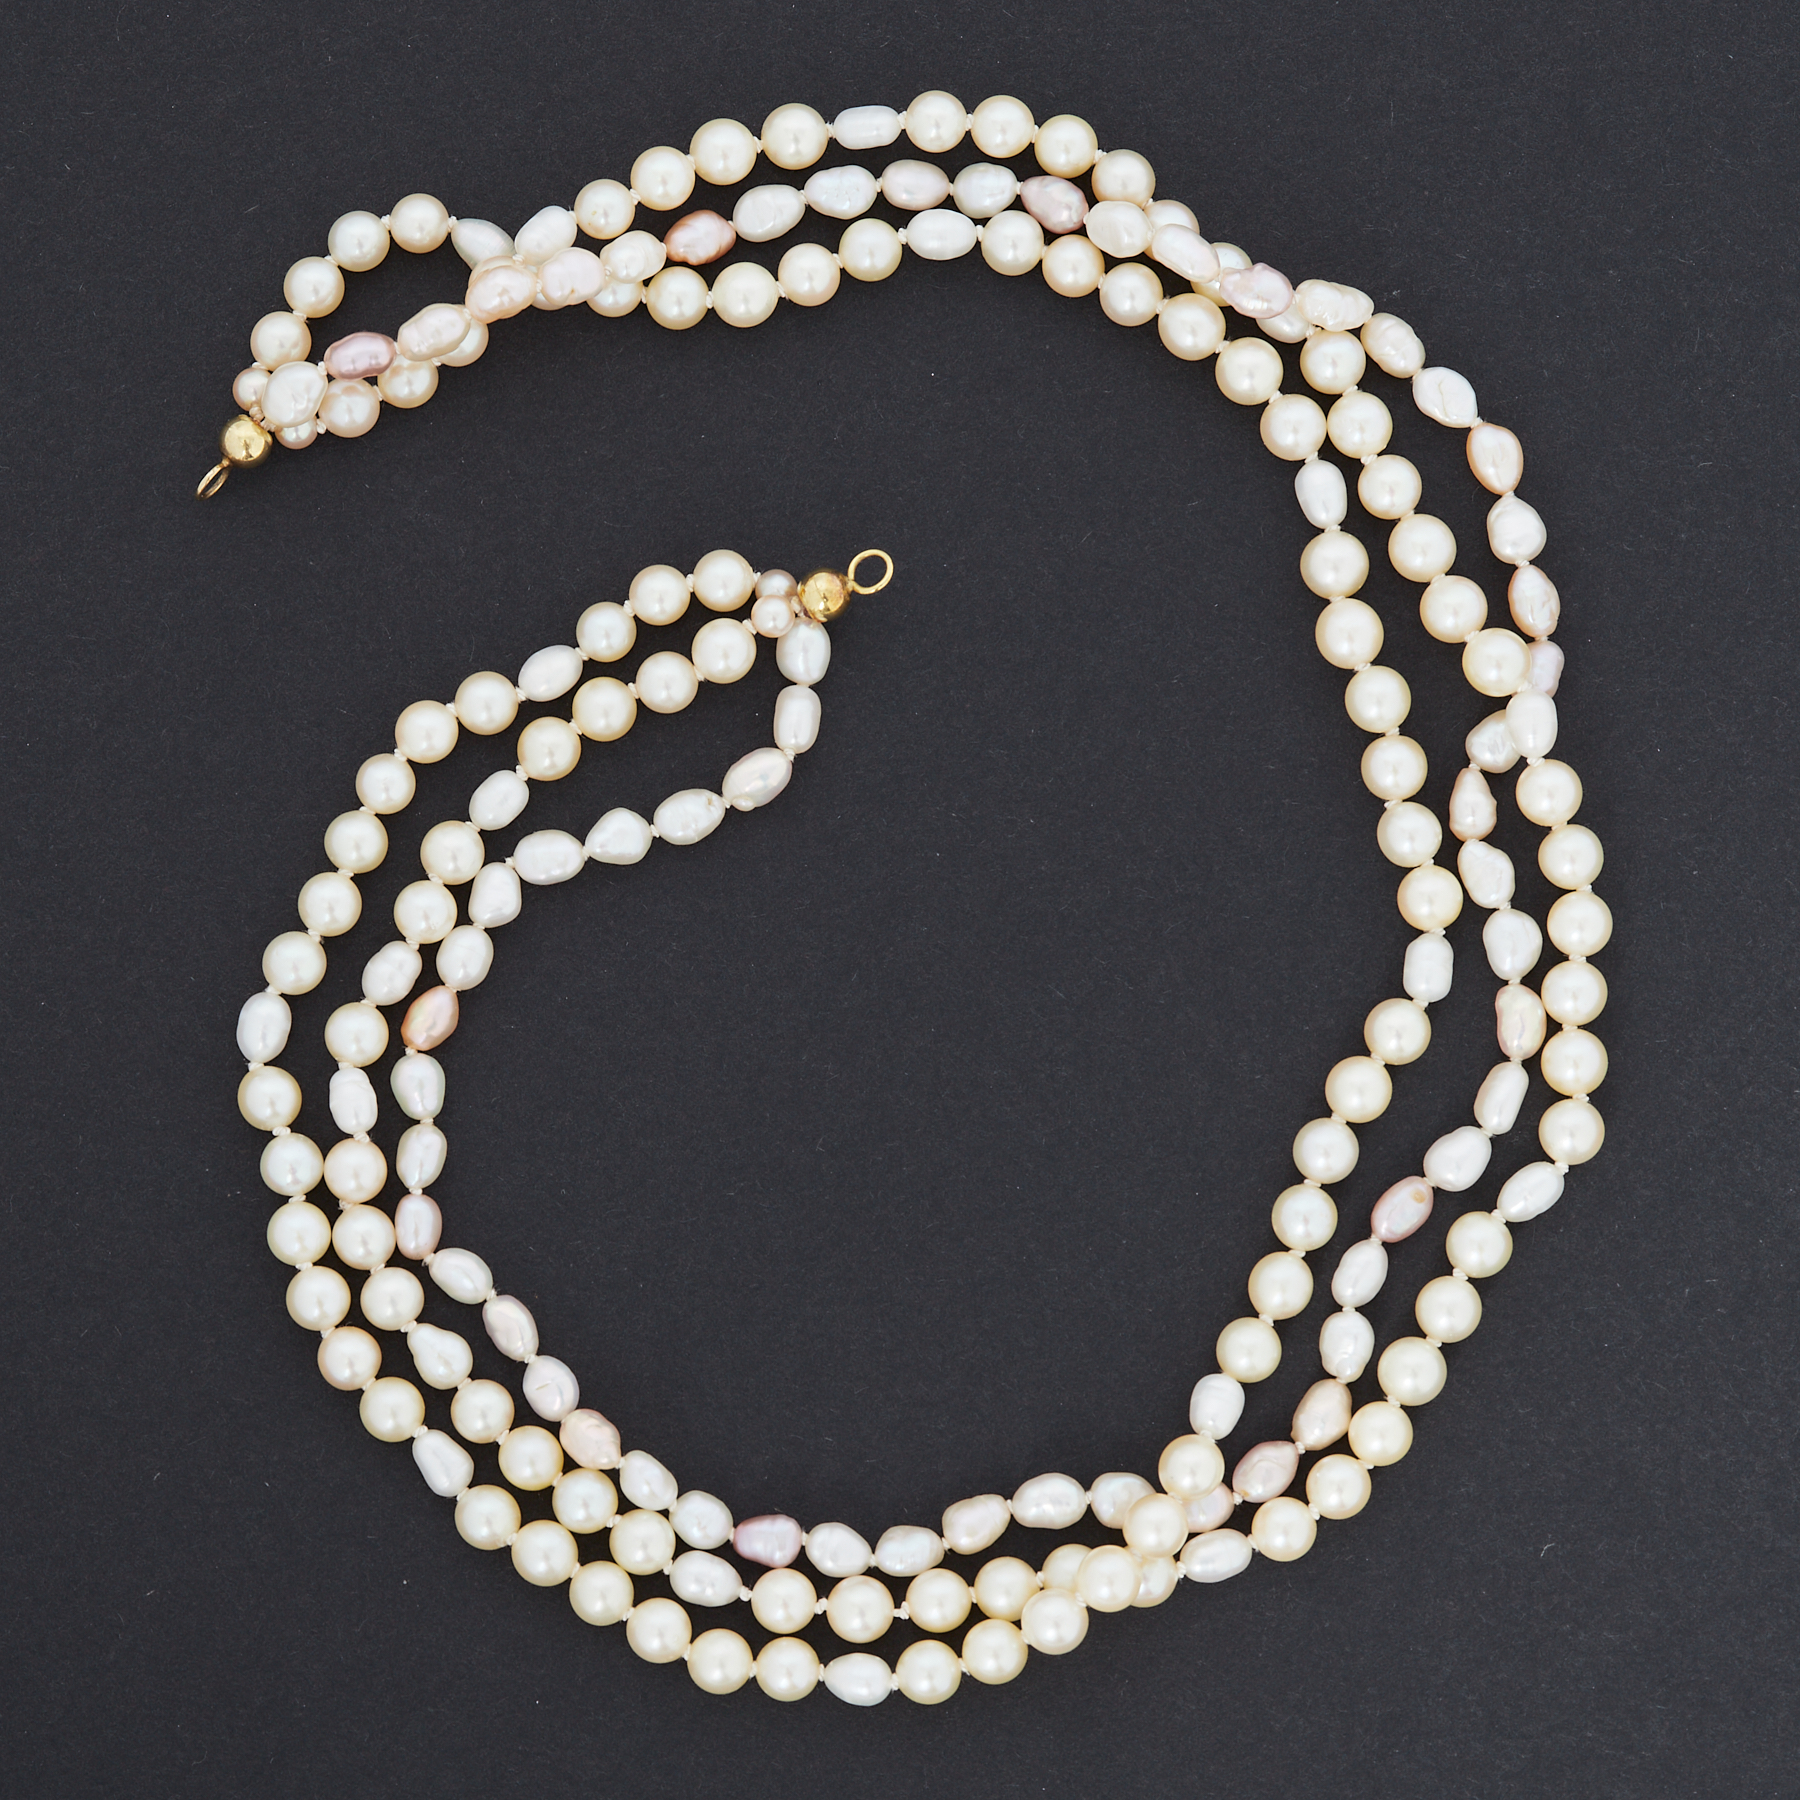 A triple row of pearls of varying shapes and colours from cream to pink, approx. 16", round pearls